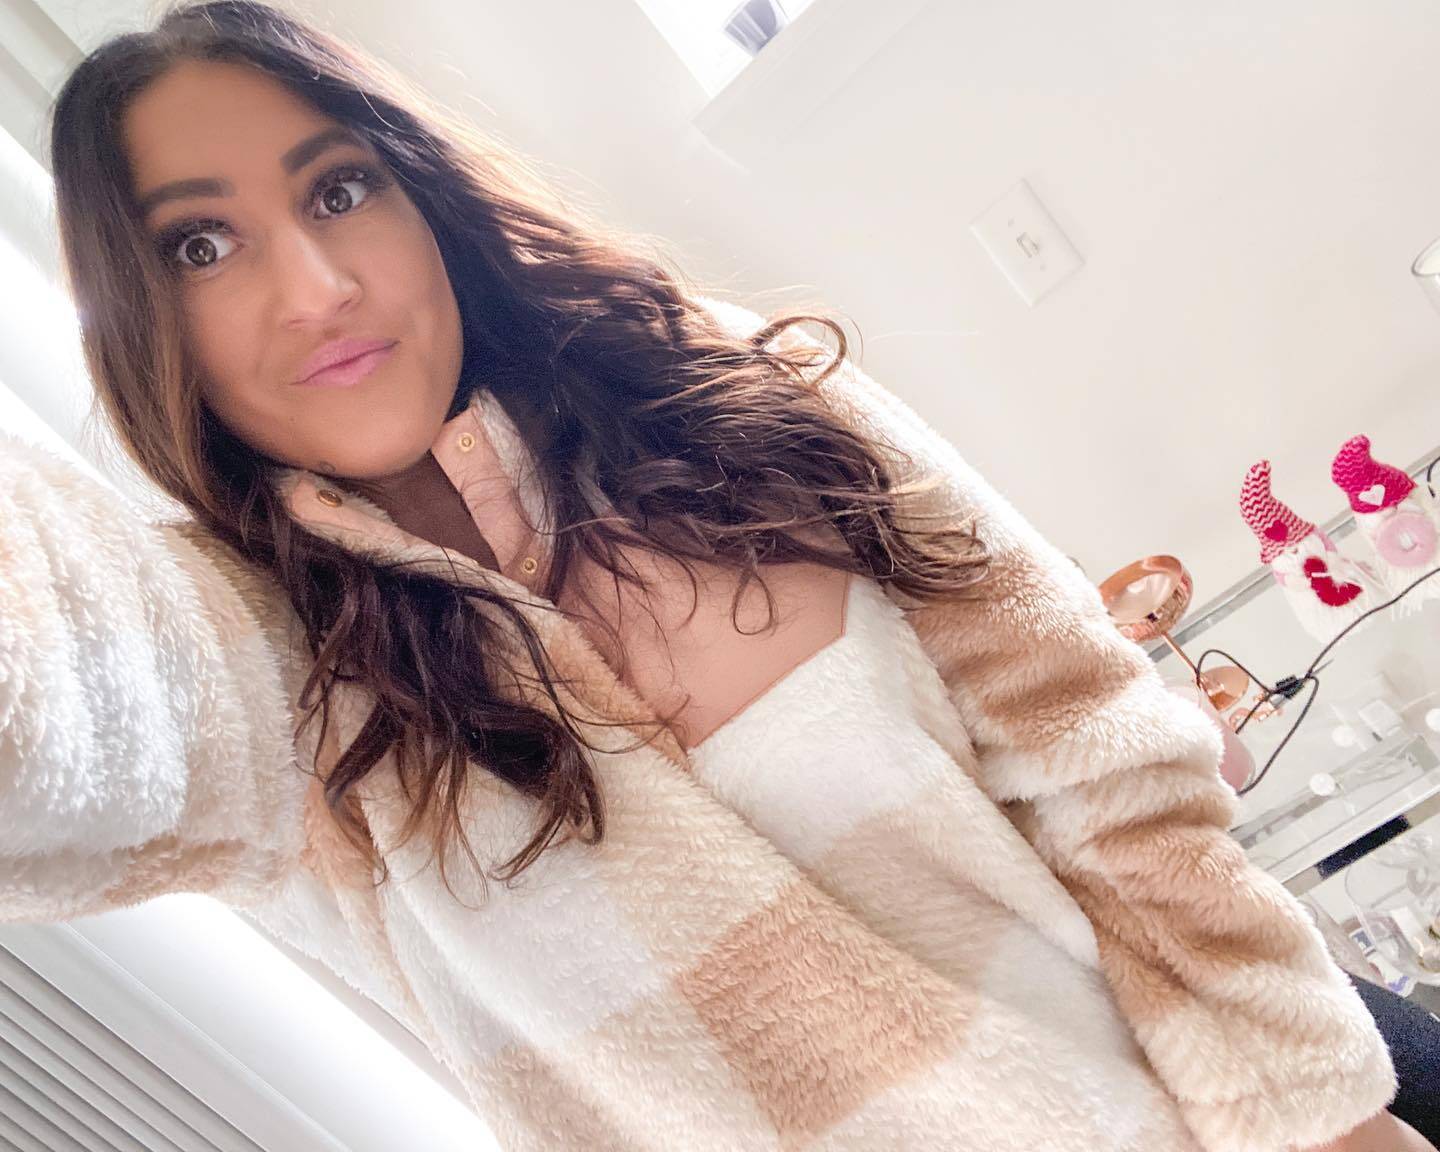 The cutest pullover is on SALE from @pinklily and comes in a bunch of other colors! It’s so warm and cozy I’m obsessed☺️ 
.
.
💗Shop here on the @shop.ltk  app and follow me to shop all my other posts (@selahchristeen) https://liketk.it/3whAB
.
.
#pinklilystyle #onlineshops #michiganblogger #detroitblogger #michiganyoutuber #casualstyle #casualoutfit #warmandcozy #sherpa #shopltk #trendystyles #sale #outfitoftheday #outfitinspo #styleblogger #outfitoftheday #fashionblogger #lifestyleblogger